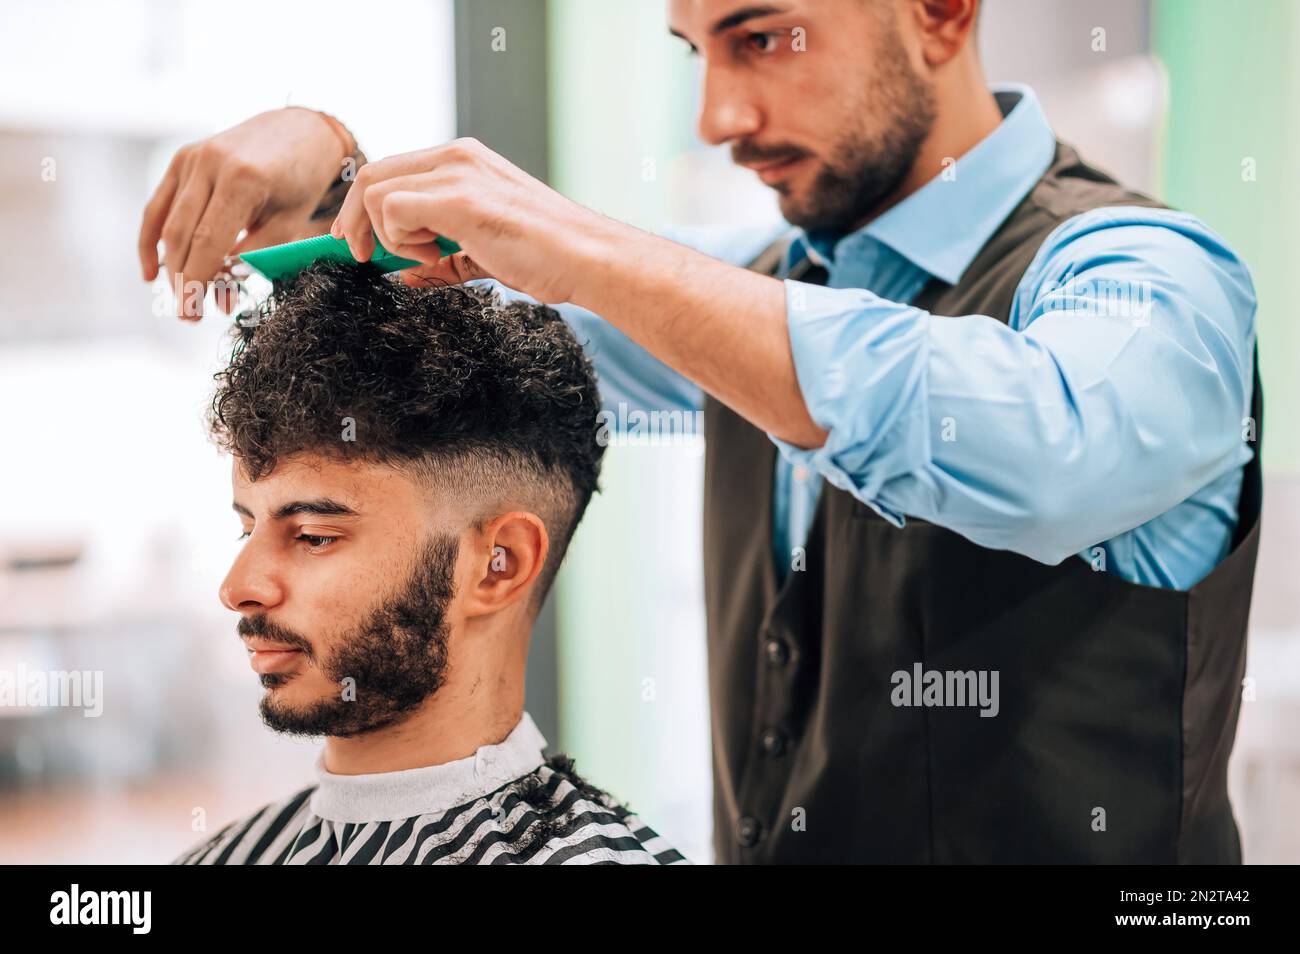 Crop barber cutting curly dark hair of bearded male client in striped cape sitting during professional haircut in barbershop Stock Photo